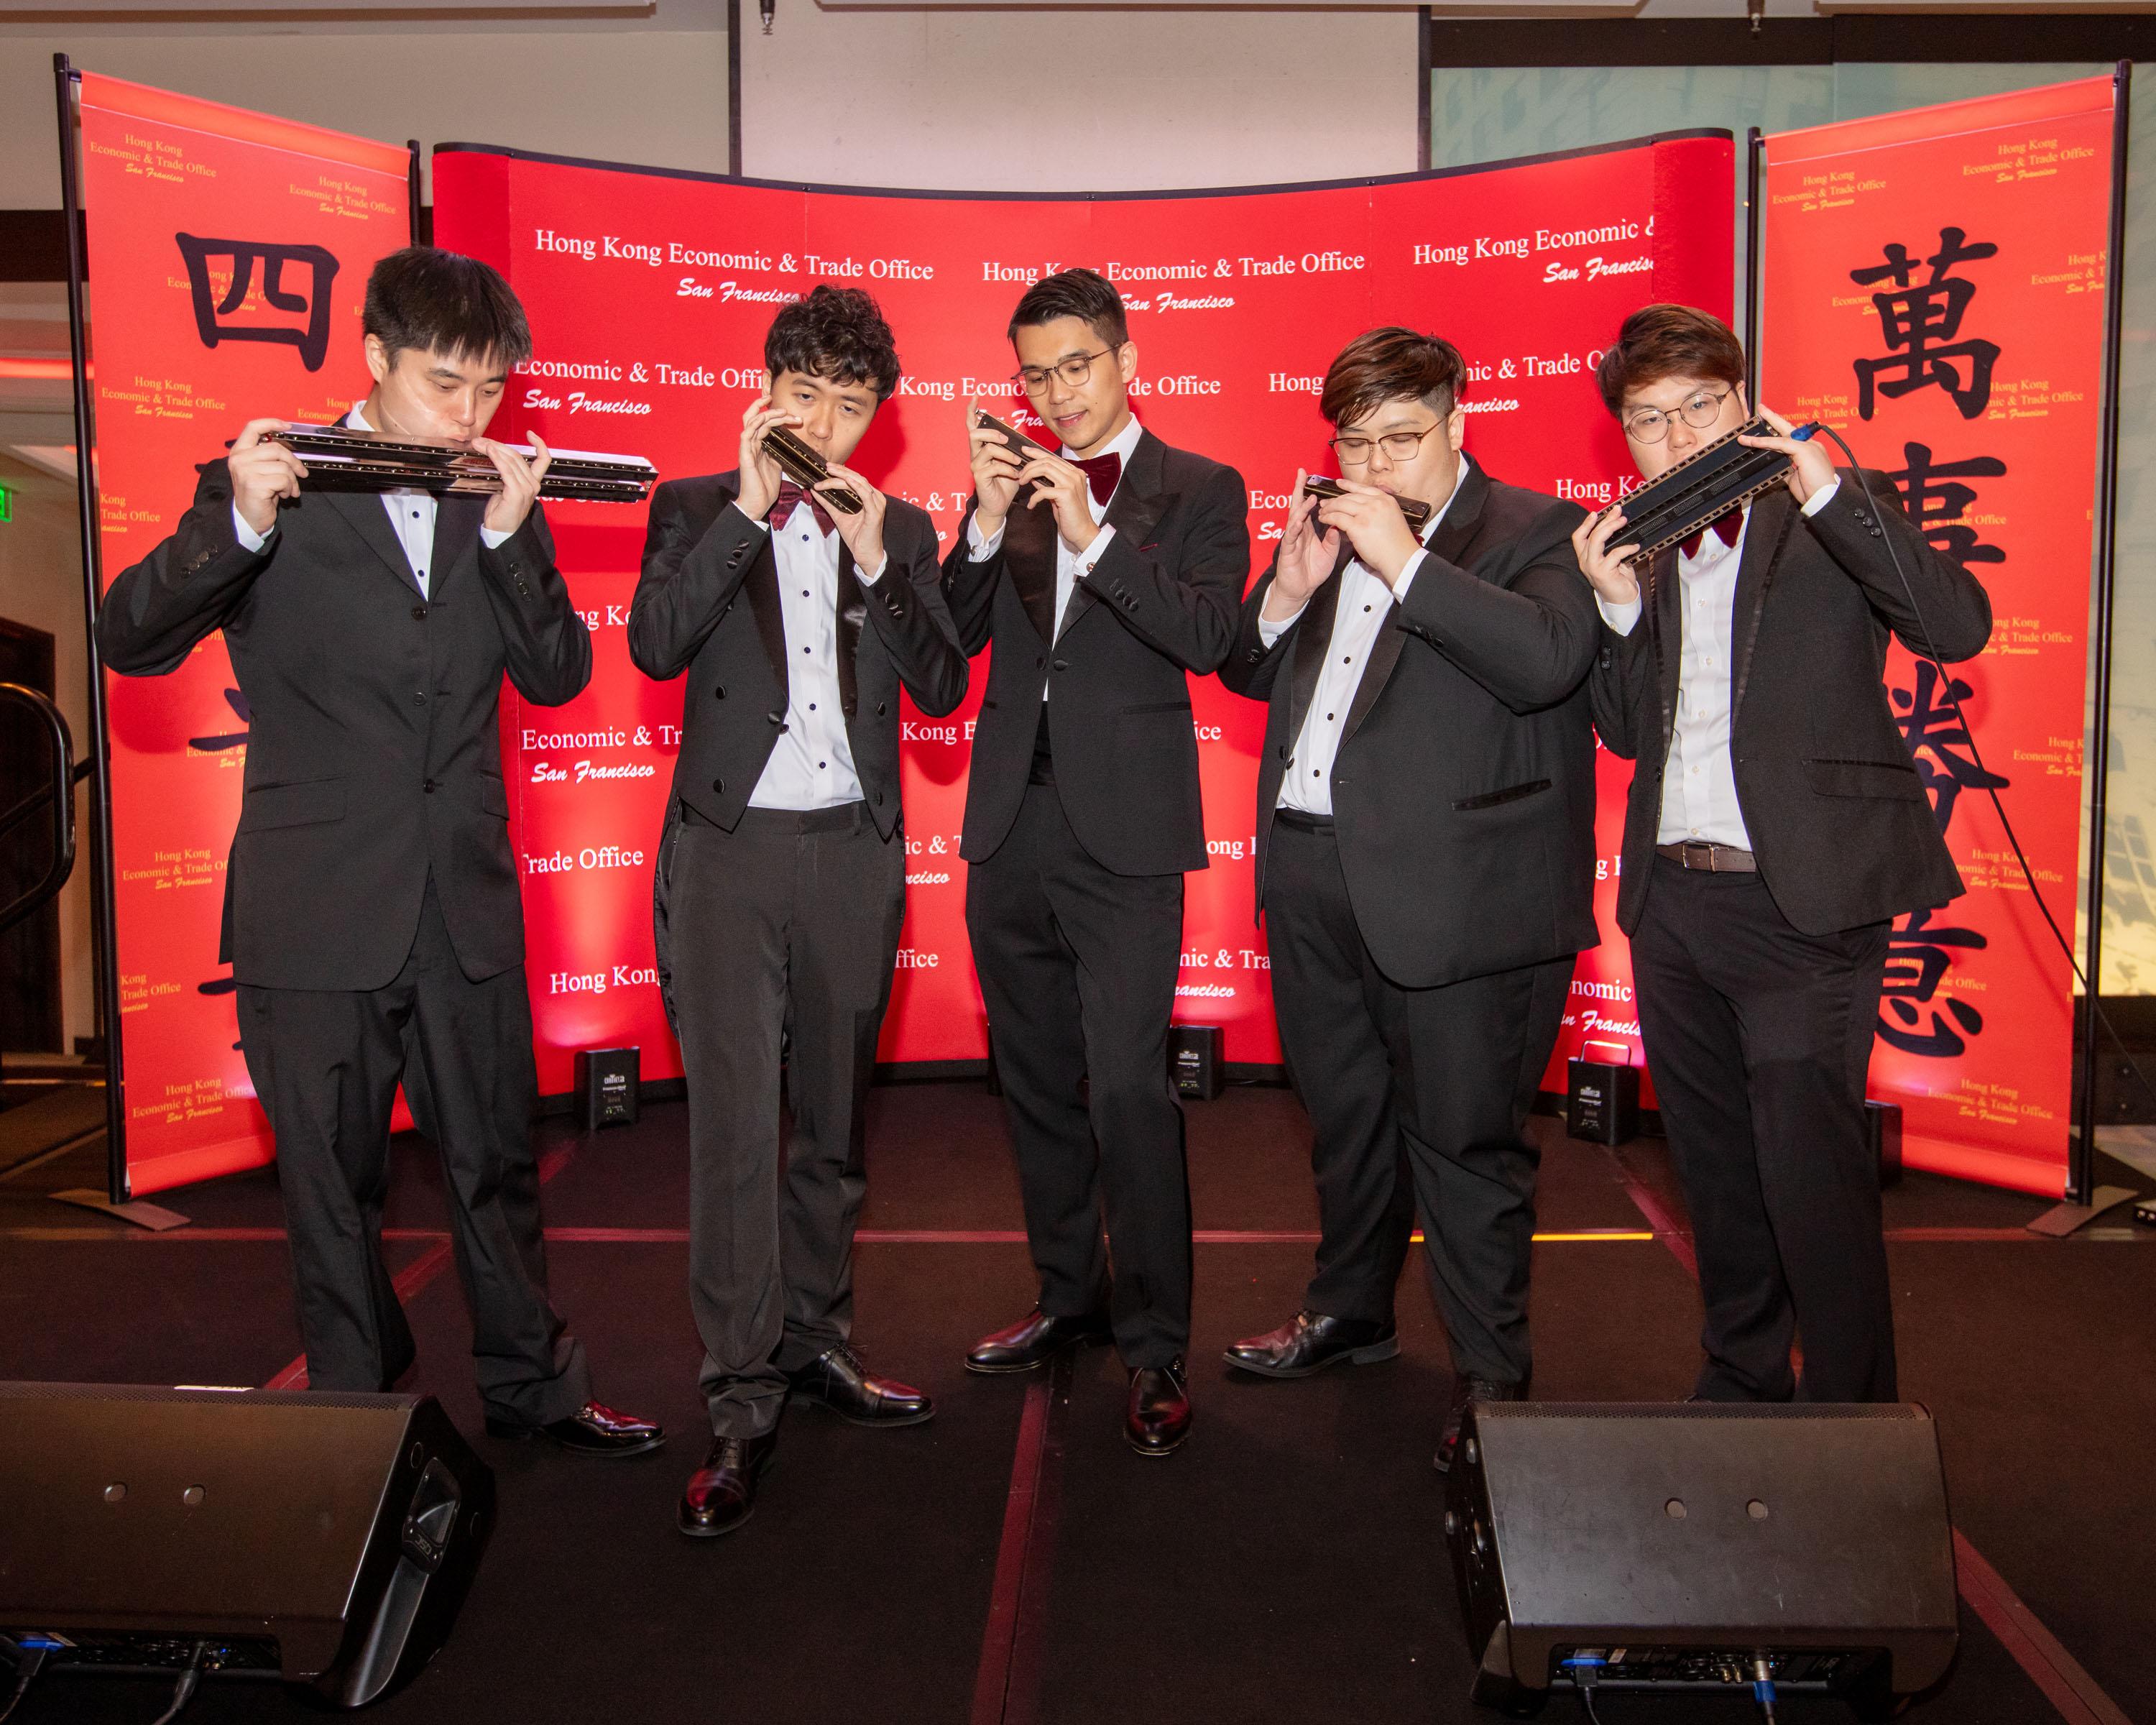 RedBricks Harmonica, a renowned harmonica ensemble from Hong Kong, performs at the spring reception in Houston, Texas, on March 1 (Houston time).